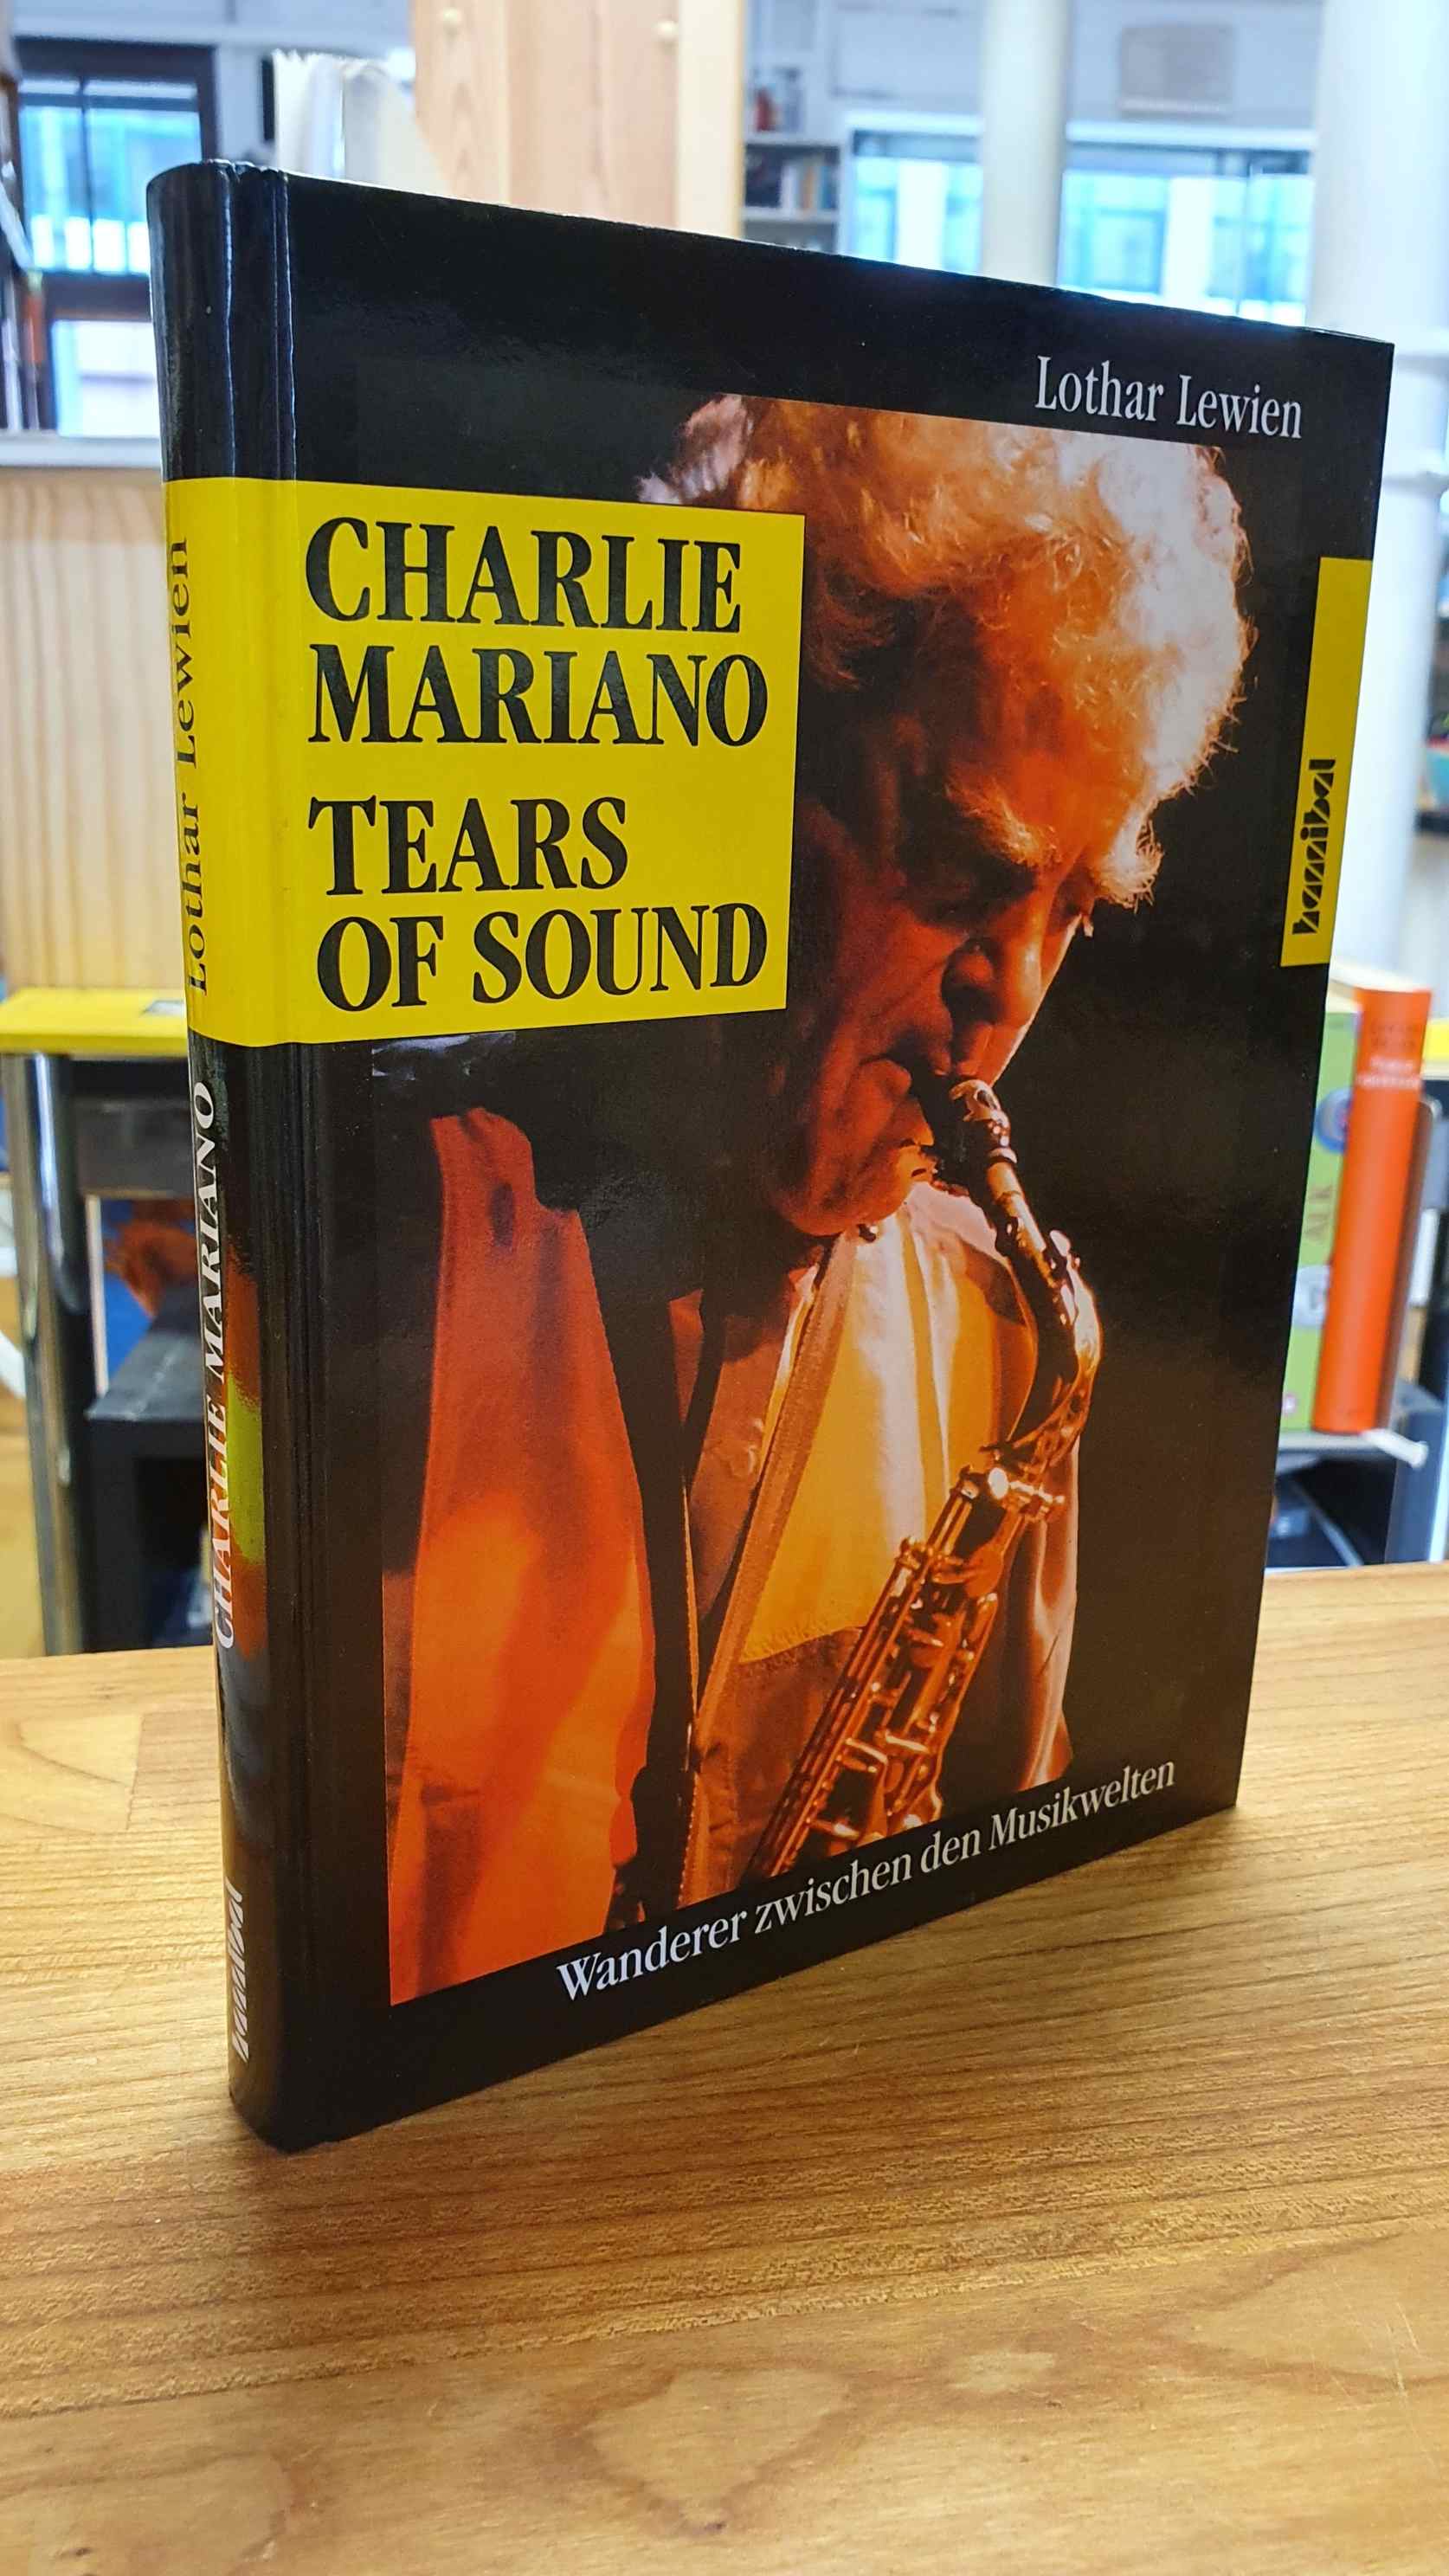 Lewien, Charlie Mariano – Tears of Sound,